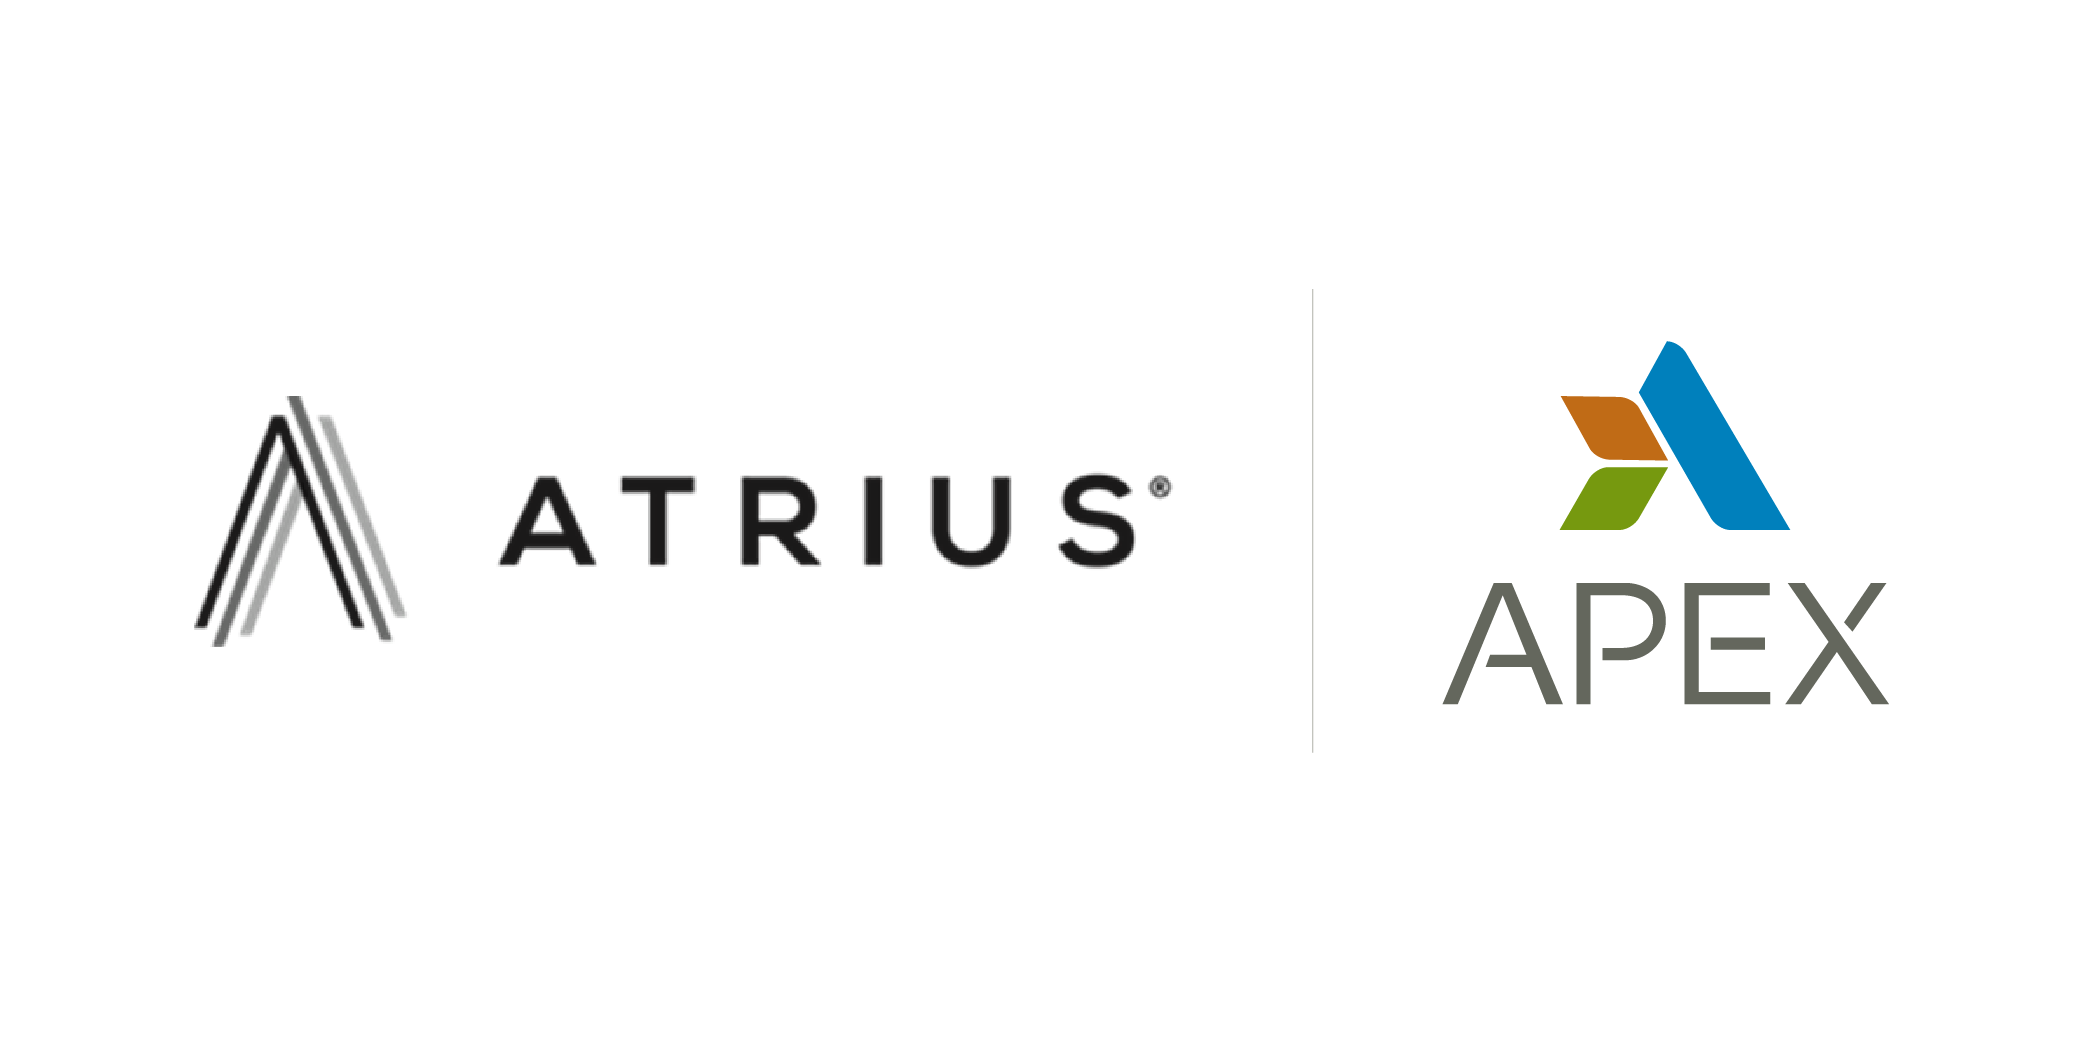 Logo lockup of Atrius and Apex who have partnered to present the Future-Proofing Sustainability Programs webinar